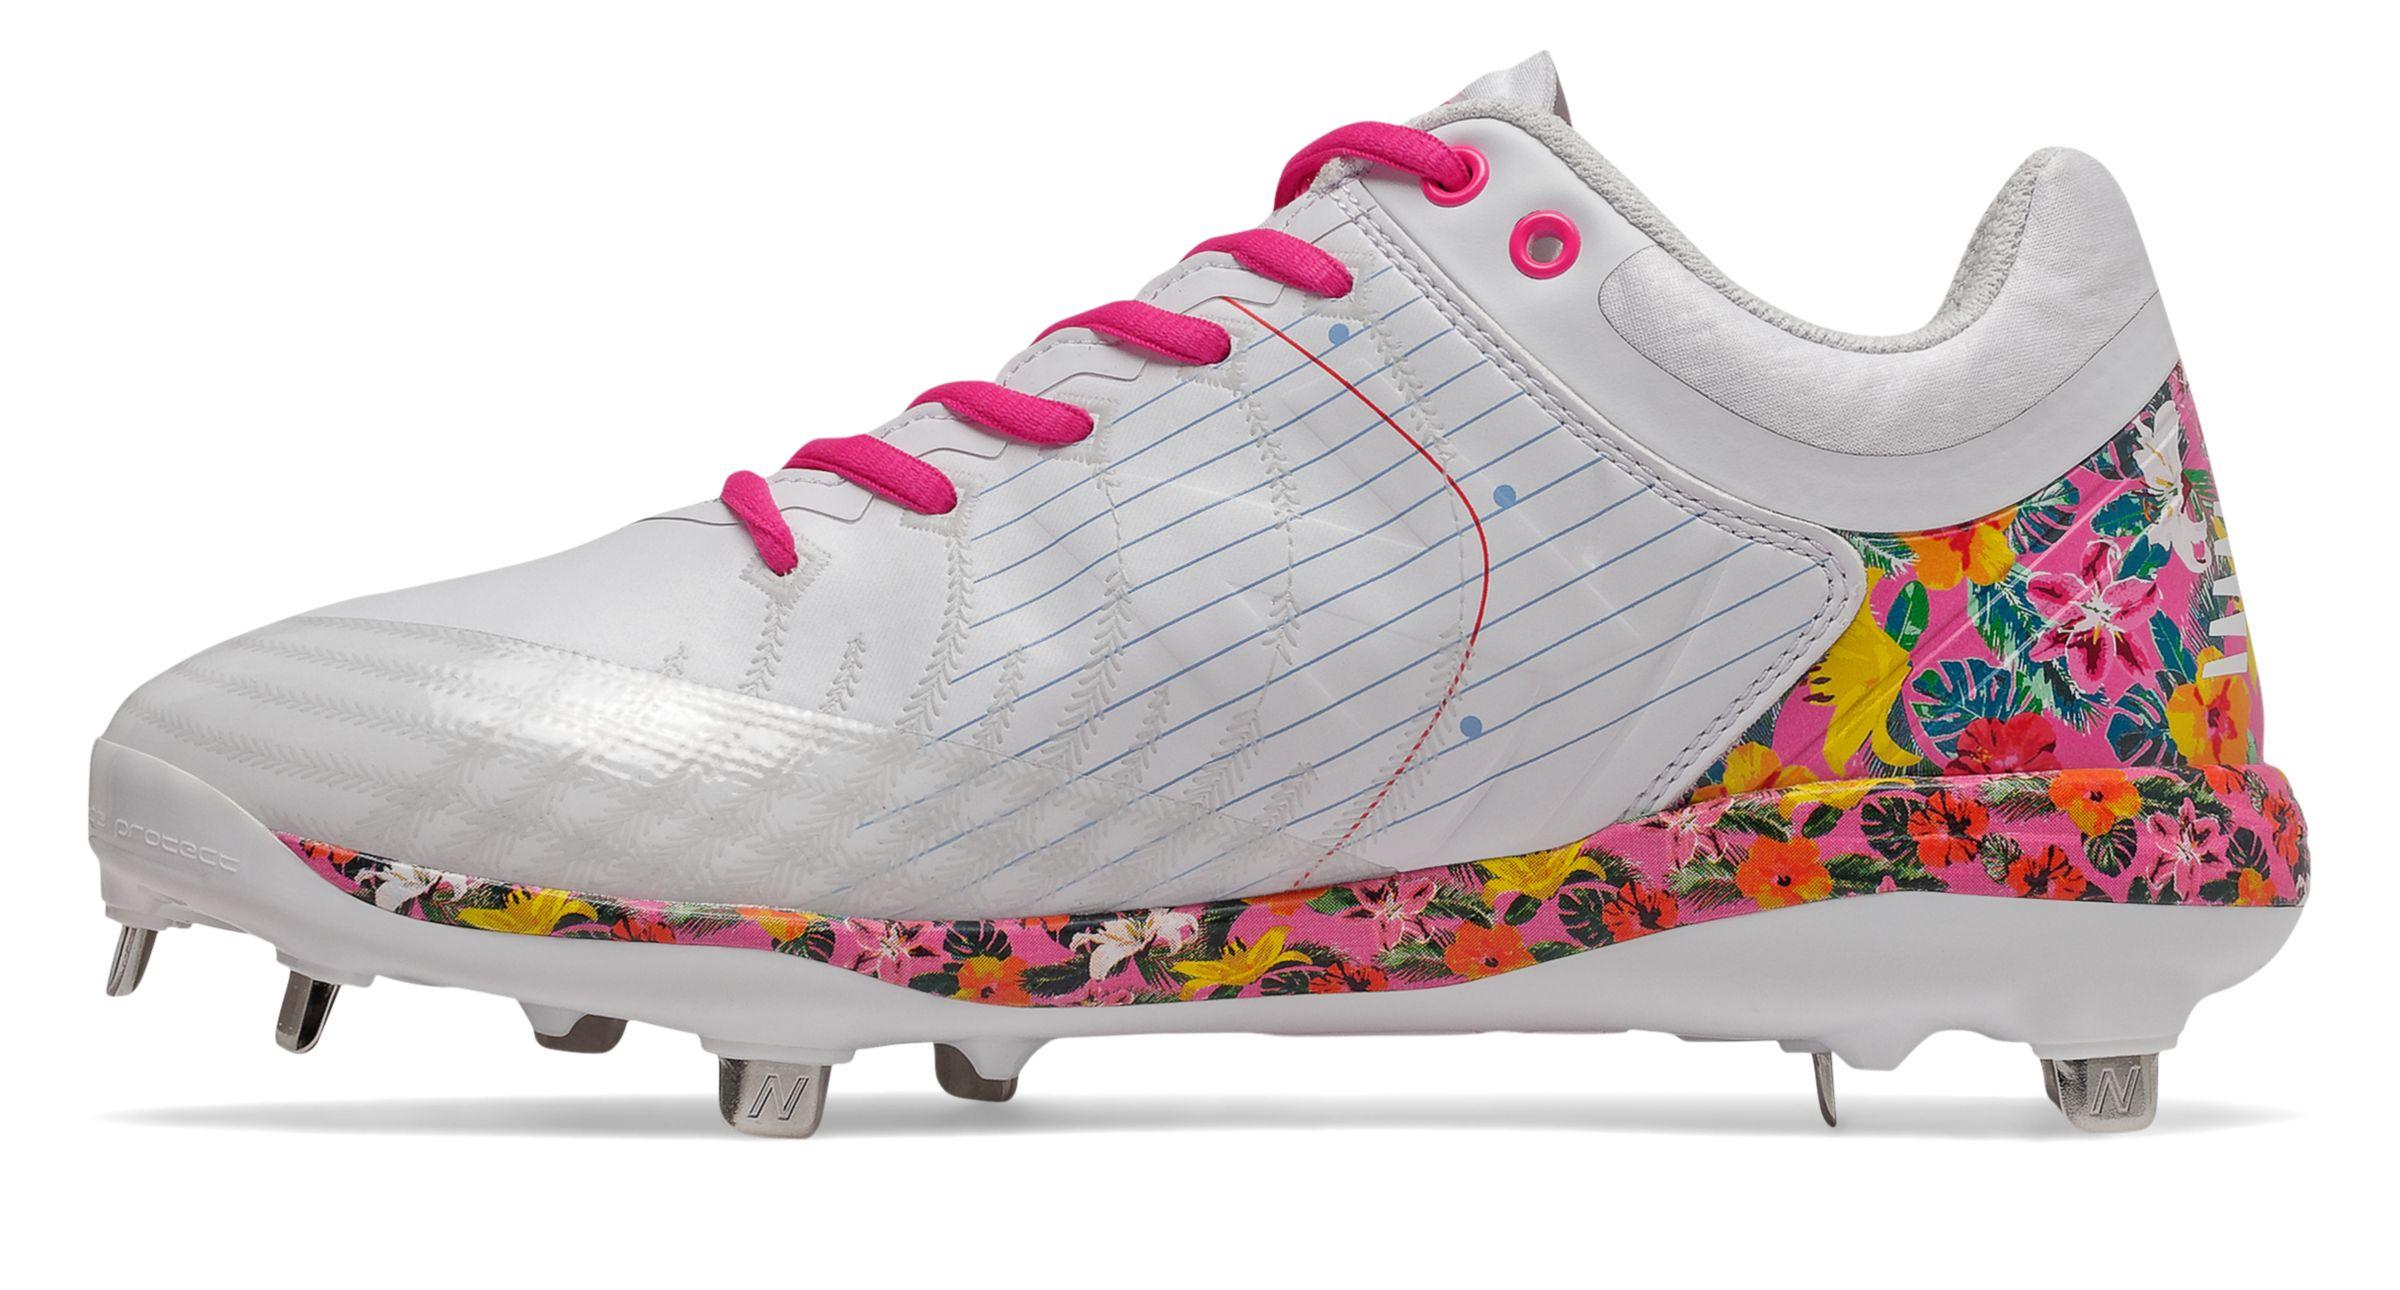 New Balance Mothers Day 4040v5 Cleats 